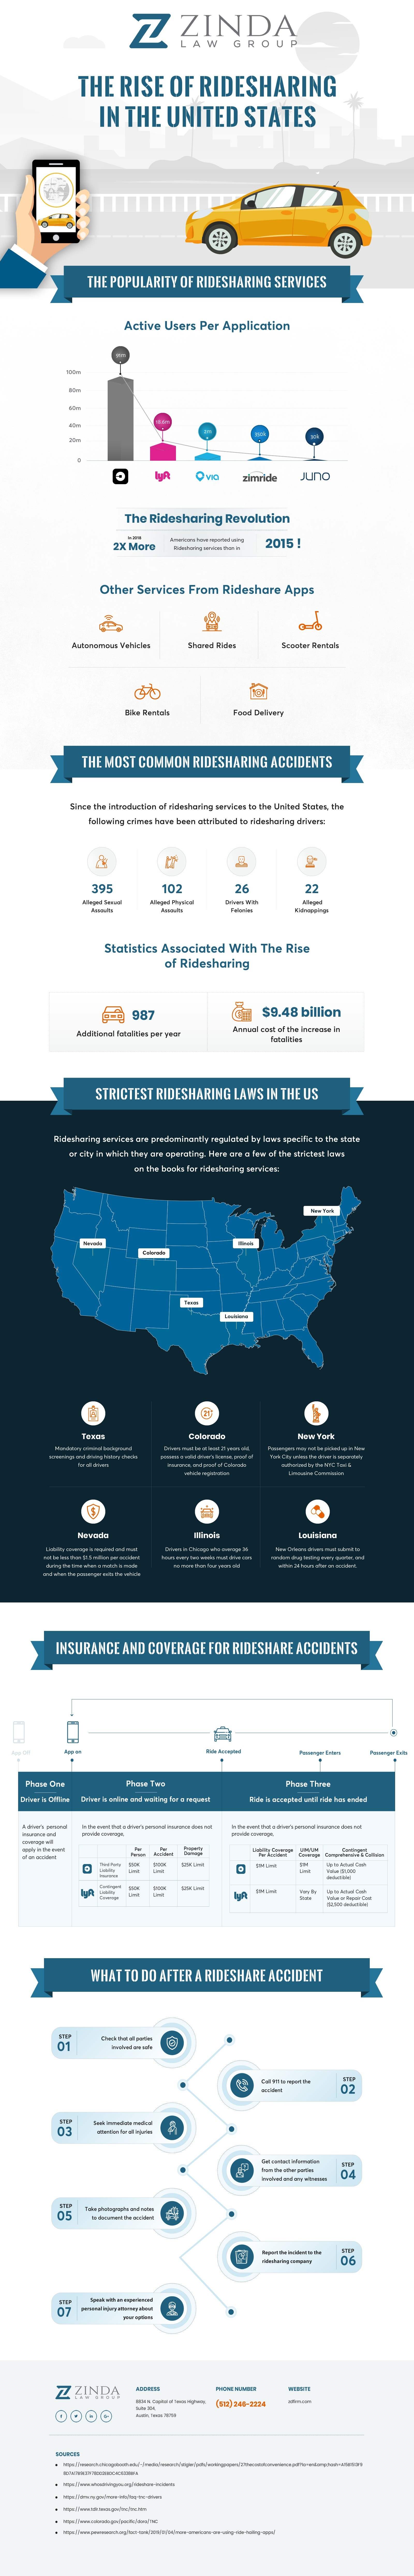 Ridesharing in the United States | Zinda Law Group